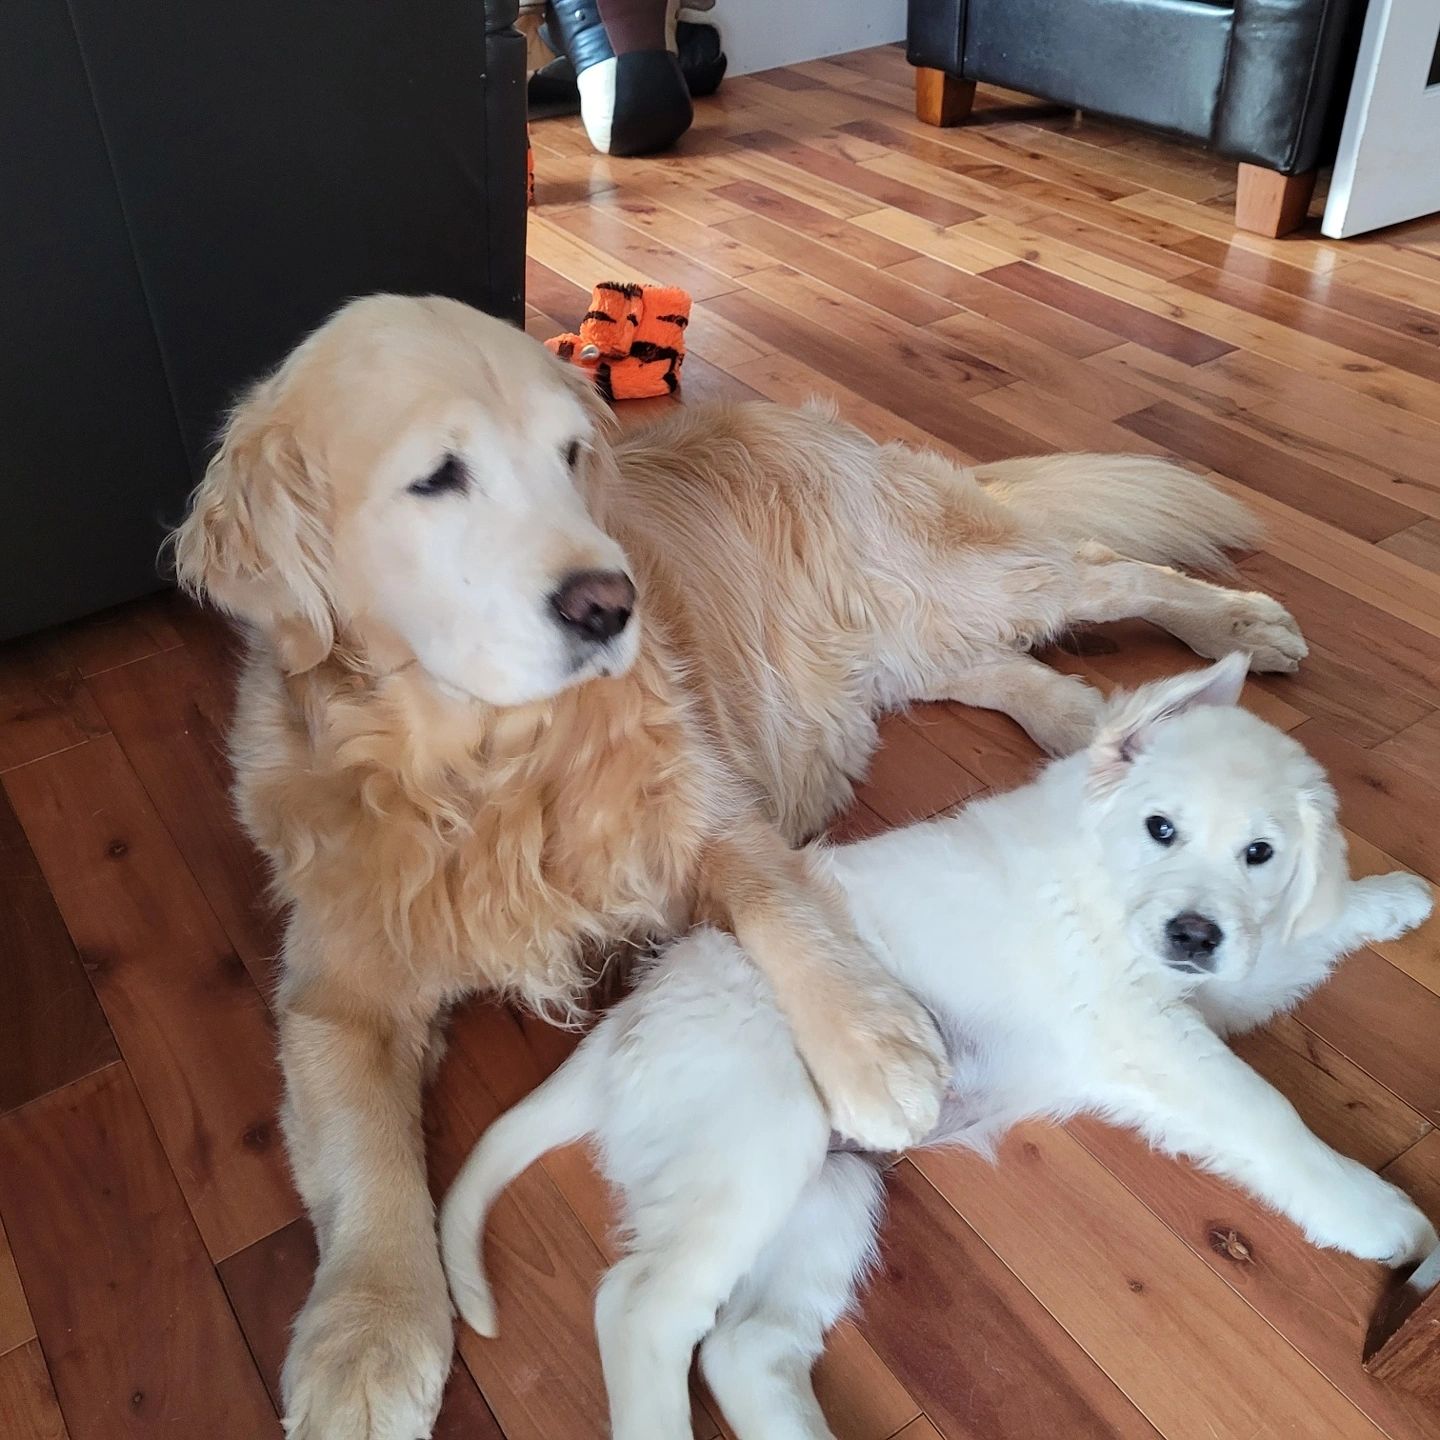 An older golden retriever laying with her paw on a cute puppy golden retriever